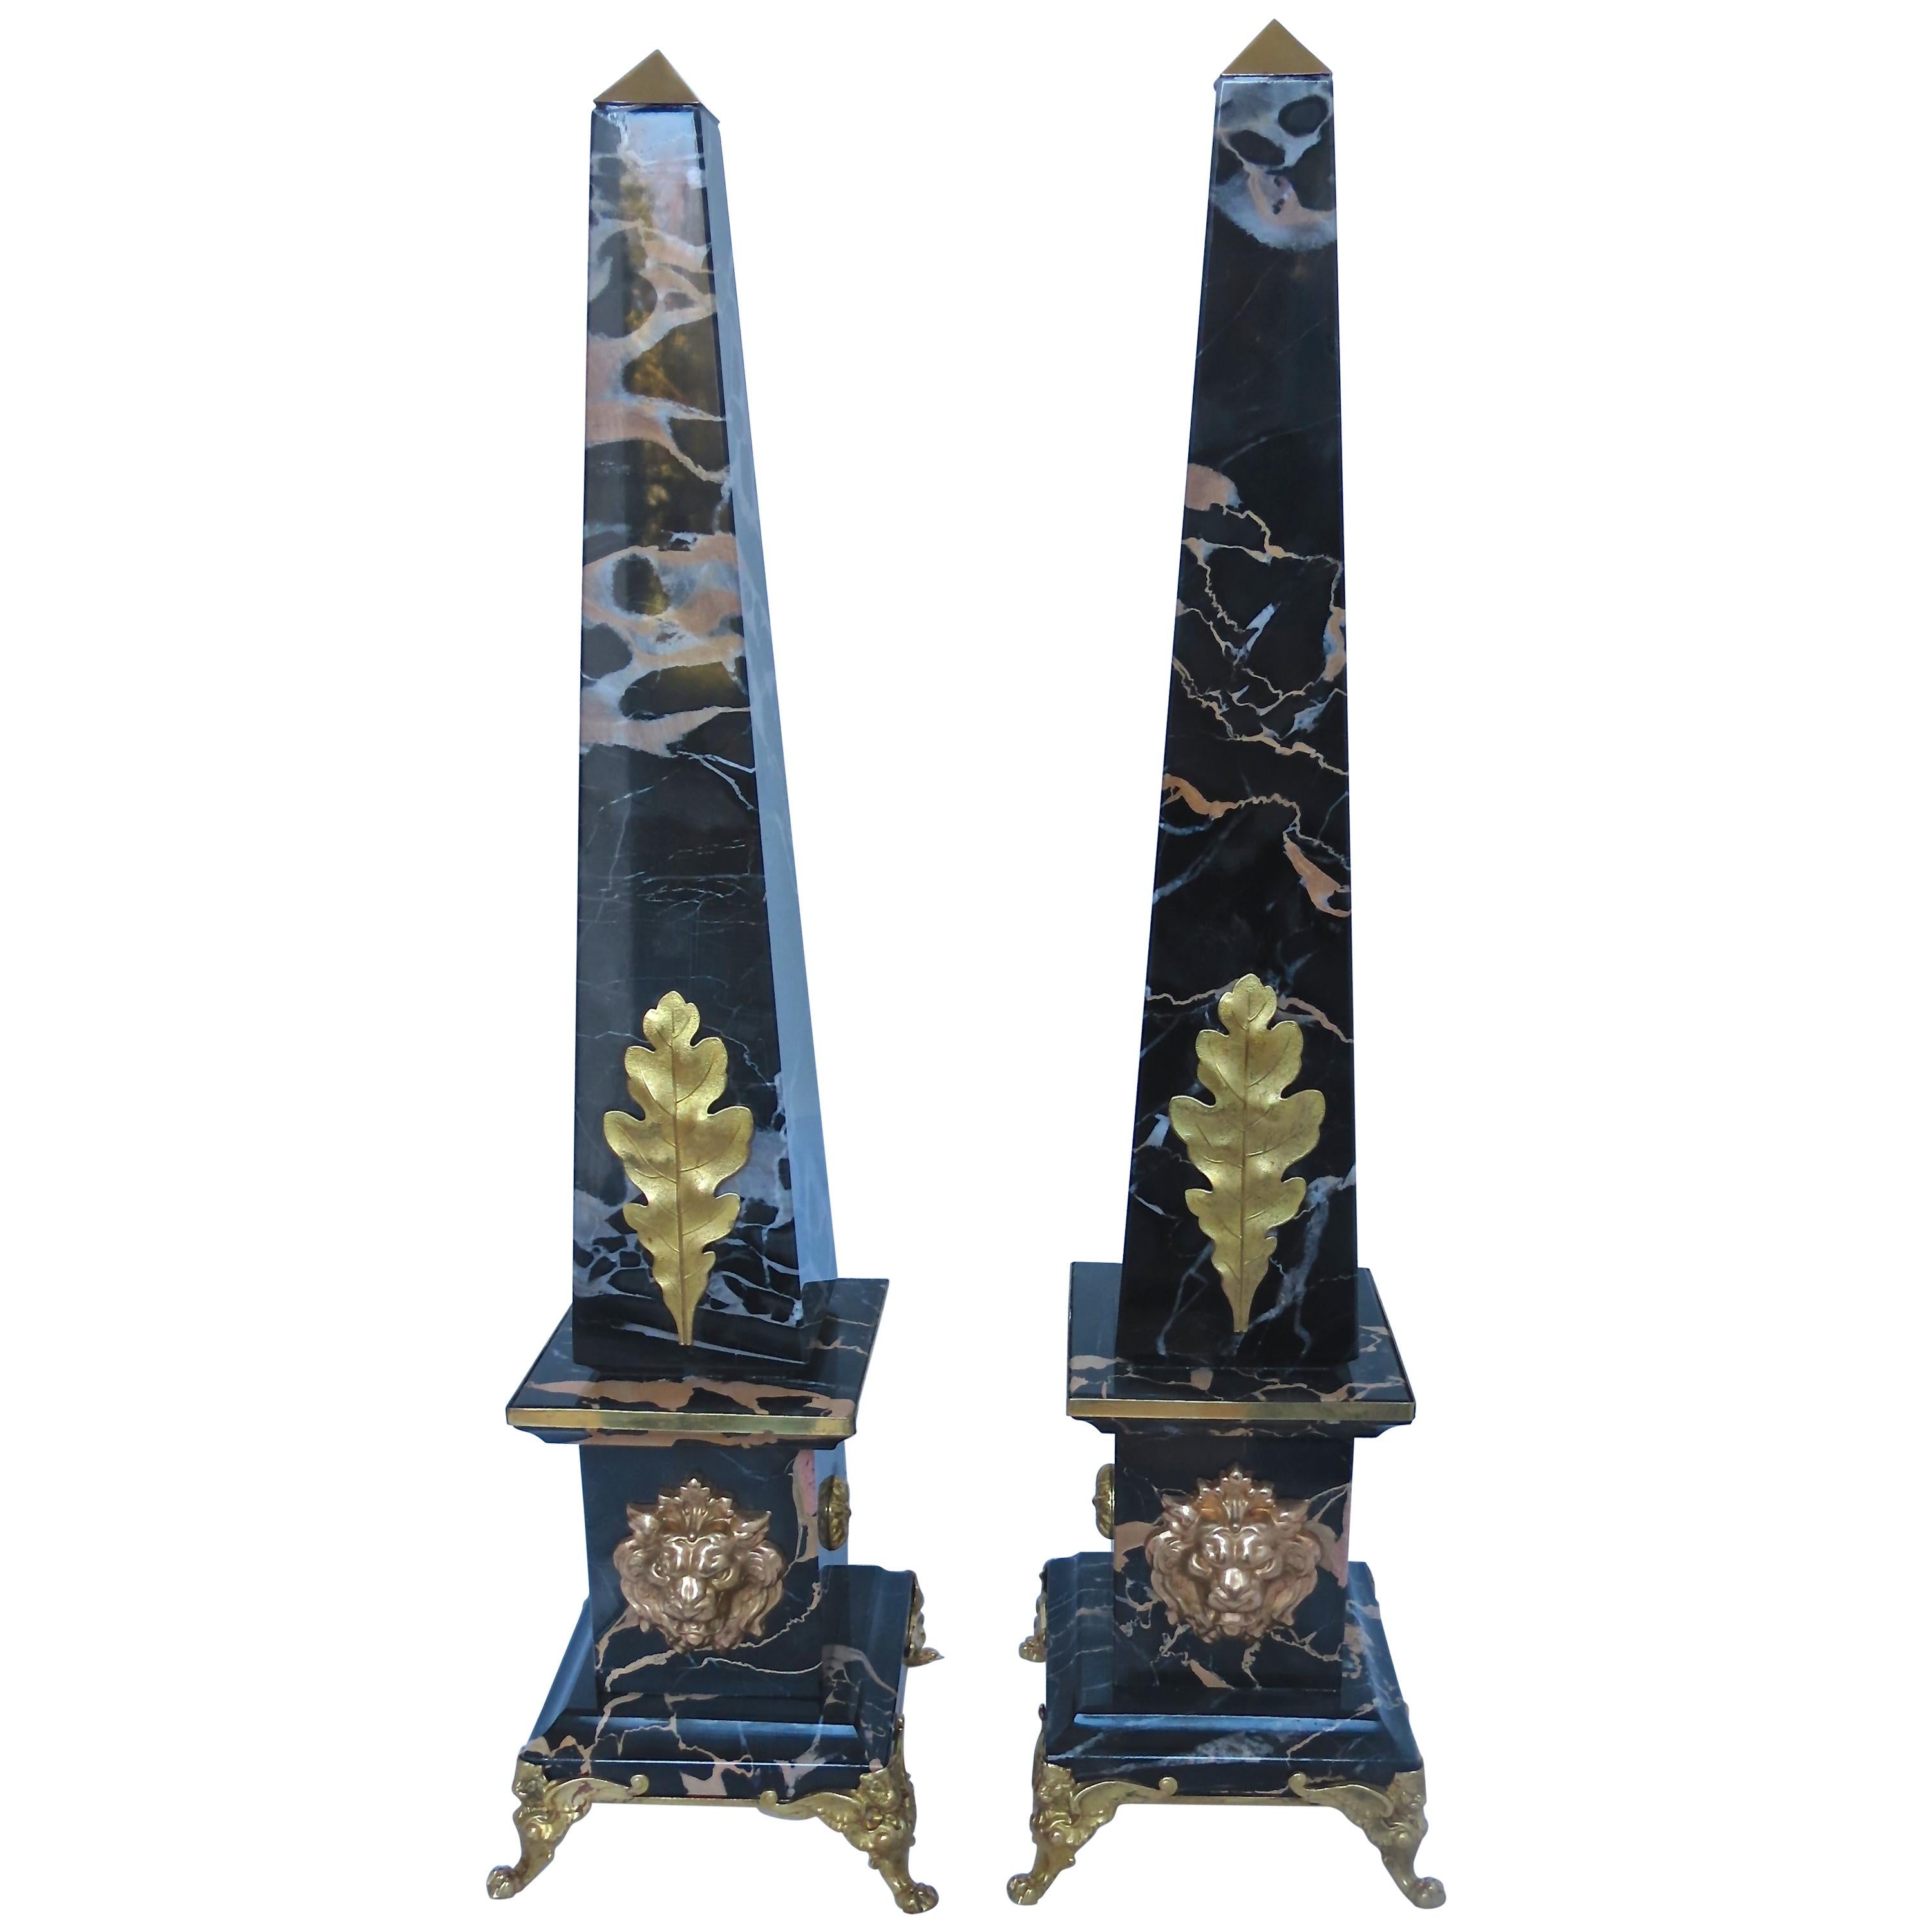 Pair of Portoro Marble and Bronze Obelisks "Gold Lion", Limited Edition, 2018